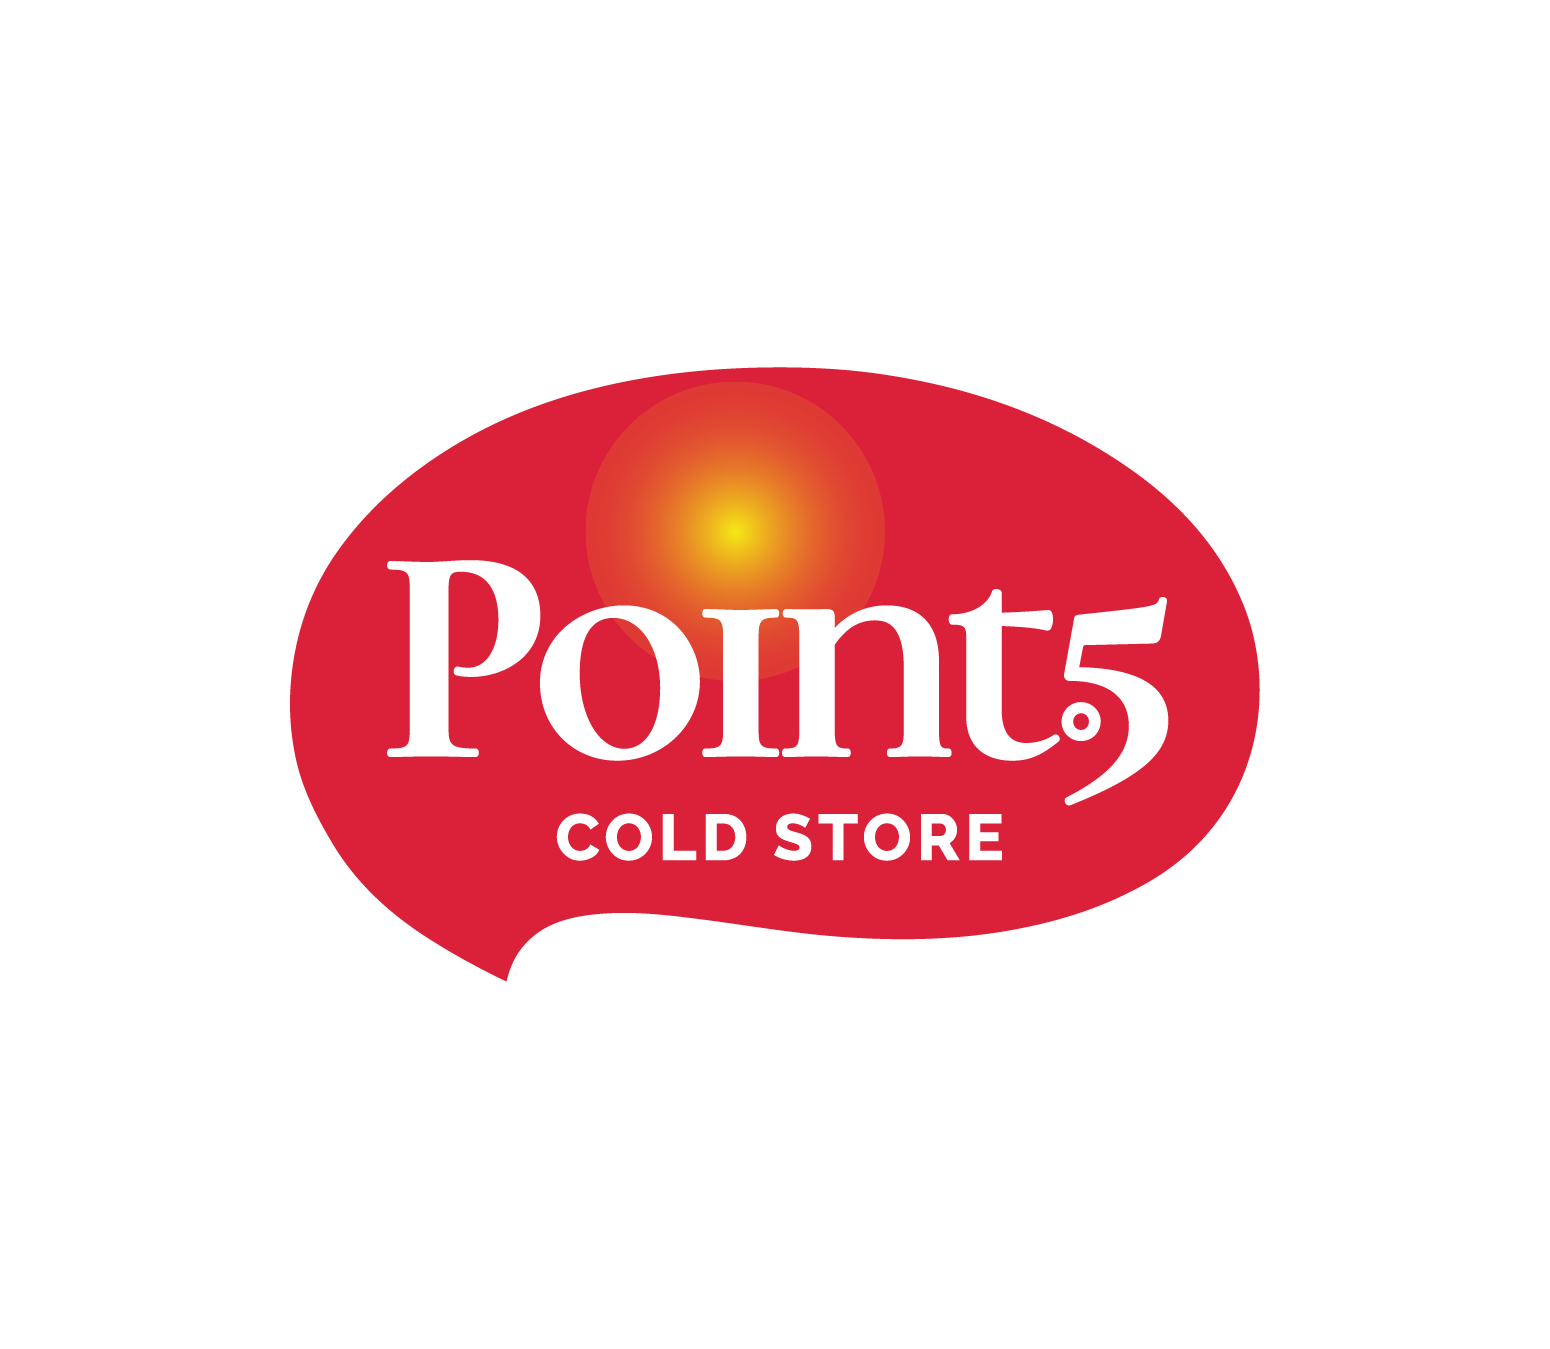 point5 Coldstore